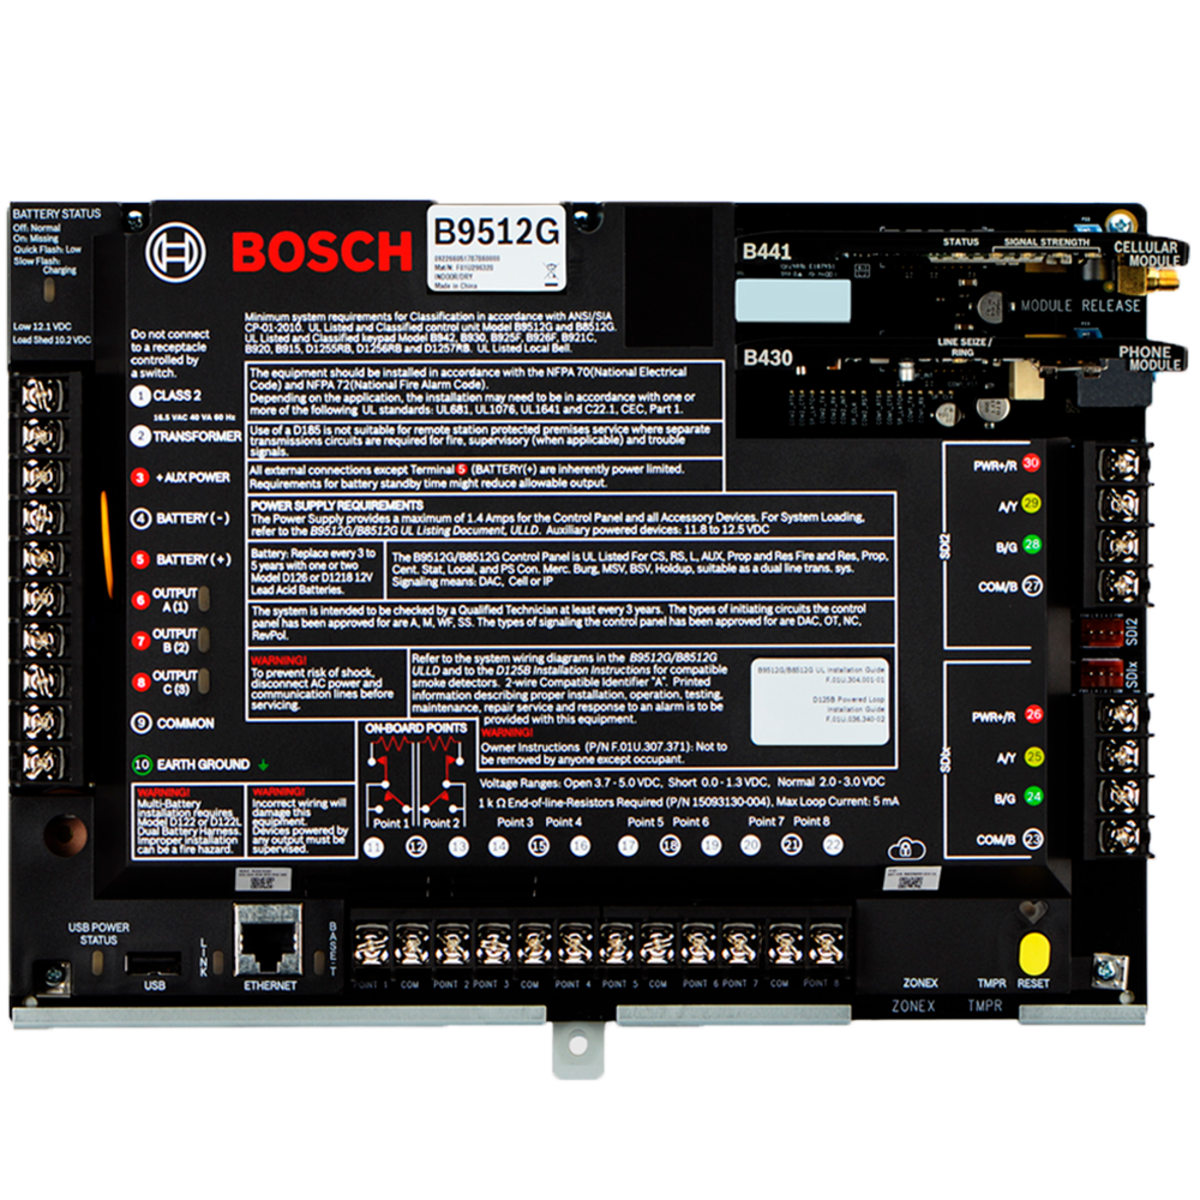 BOSCH G-SERIES HARDWIRED ALARM PANEL/ ACCESS CONTROL PANEL BLACK 8 x ZONE EXPAND UP TO 599 ZONE 3 x OUTPUT EXPAND UP TO 599 ZONE 32 AREAS 2000 USERS 32 DOORS 32 KEYPAD 504 WIRELESS 10,192 EVENTS PCB ENCLOSURE MOUNT 16-18VAC MAX 16 IP CAM *REQUIRED POWER SUPPLY*